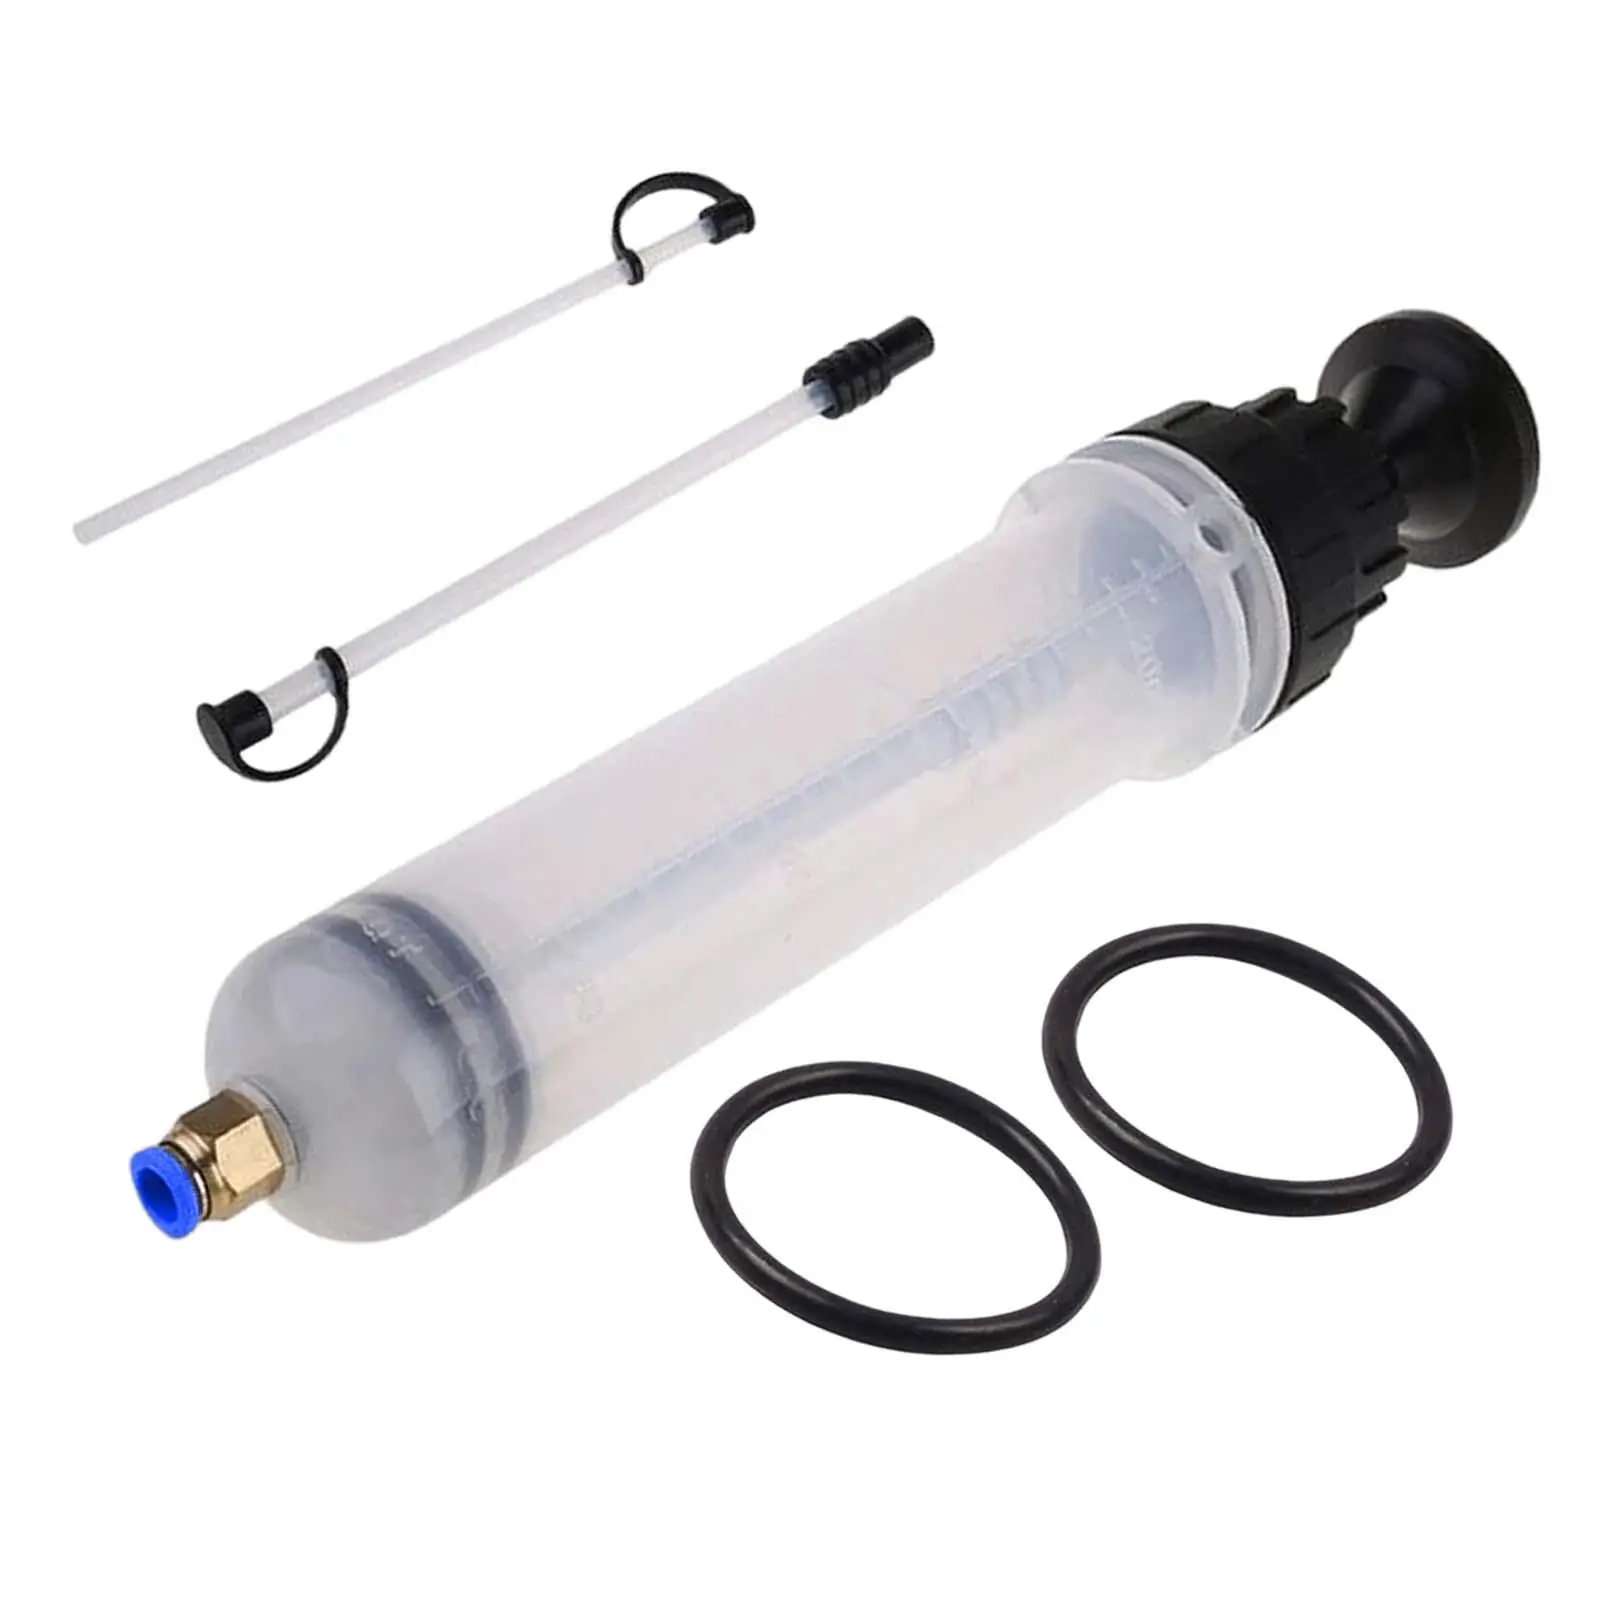 Auto Brake Fluid Extractor Fluid Transfer Hand Pump Tool for Motorcycle